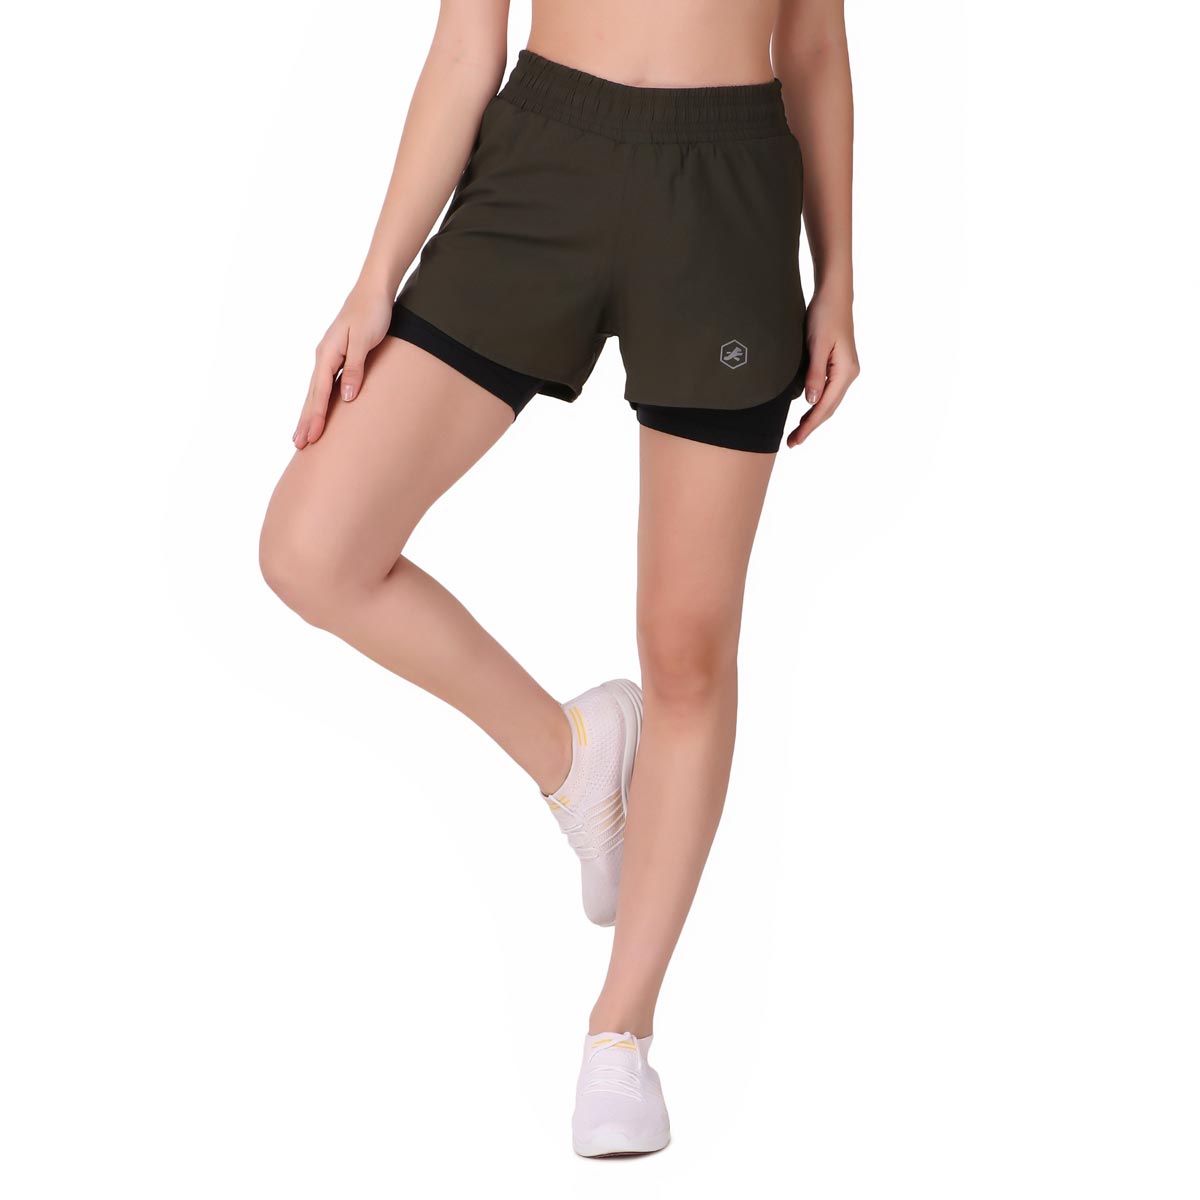 Performance Shorts For Women With Inbuilt Tights (Olive